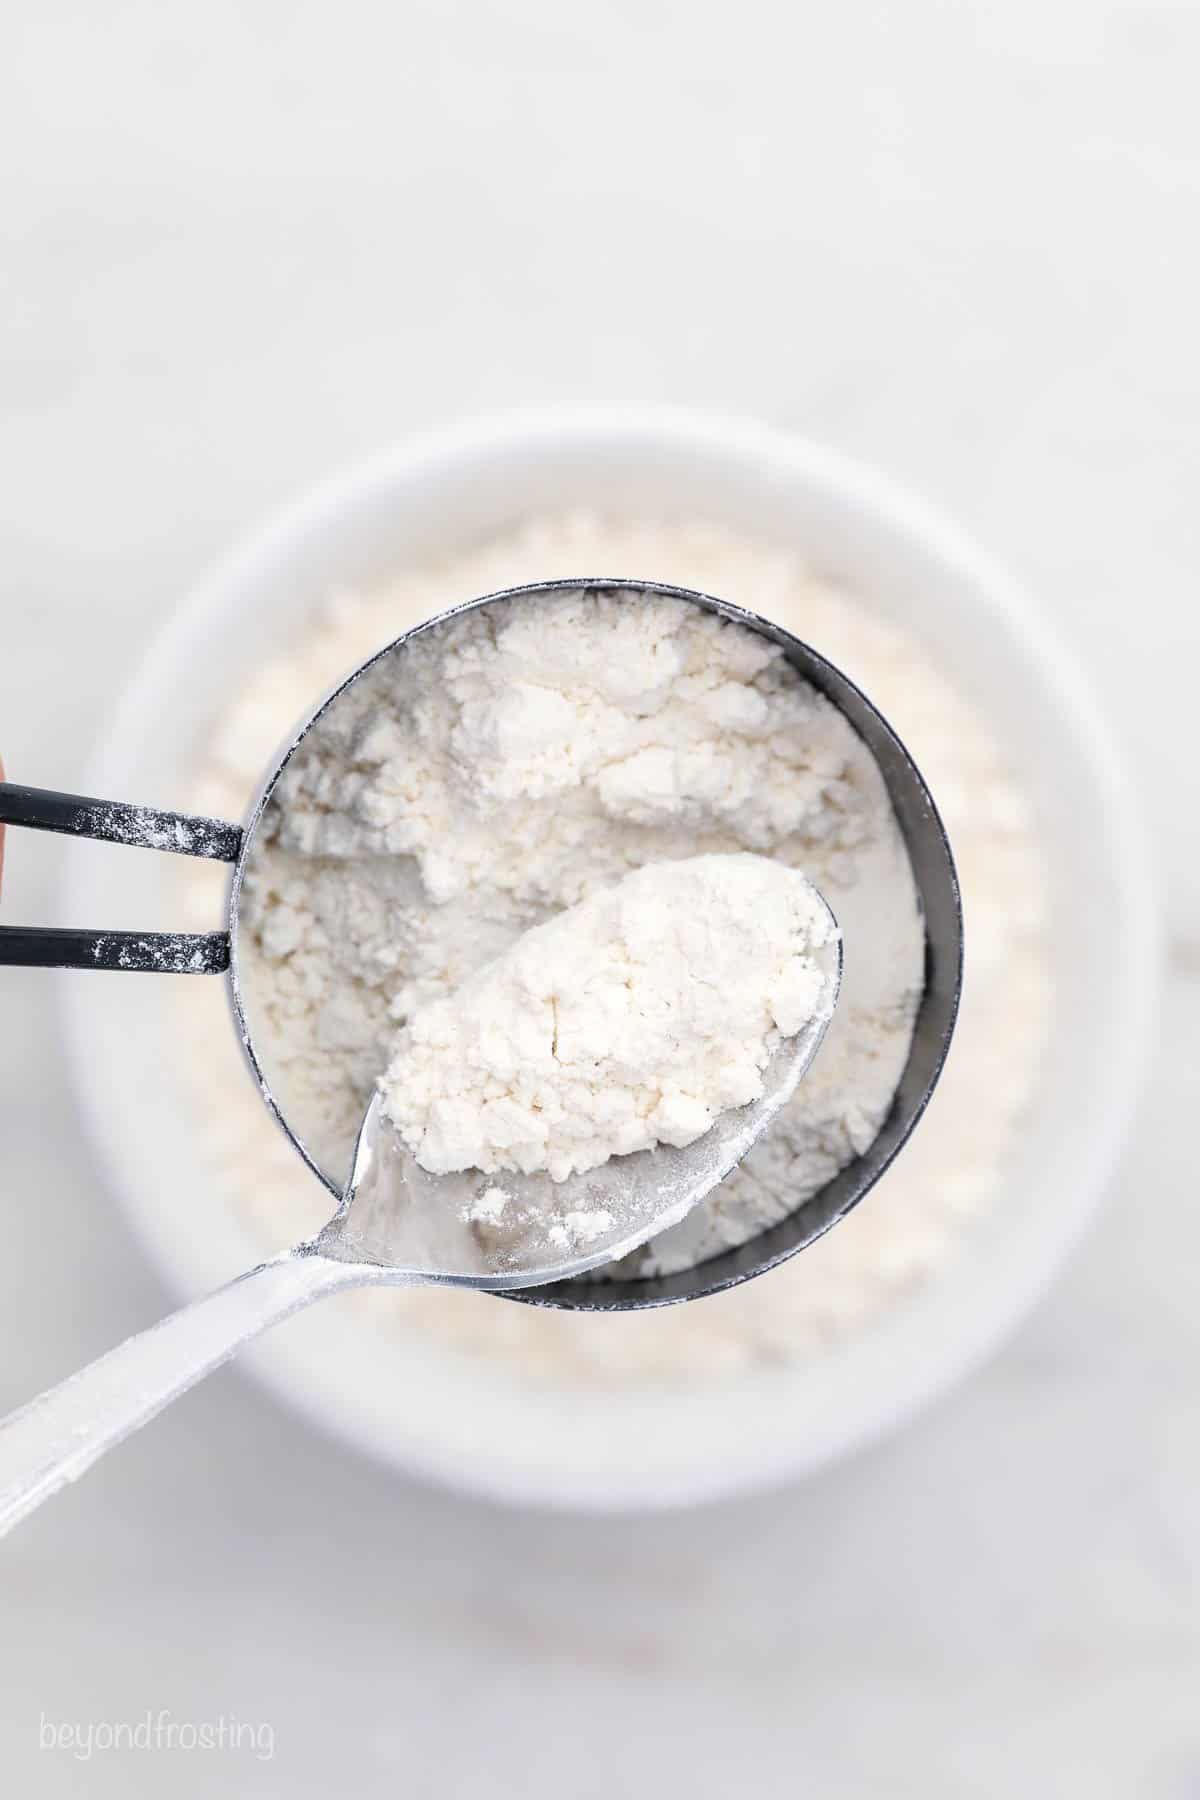 A standard-size spoon scooping some fluffed-up flour into a measuring cup